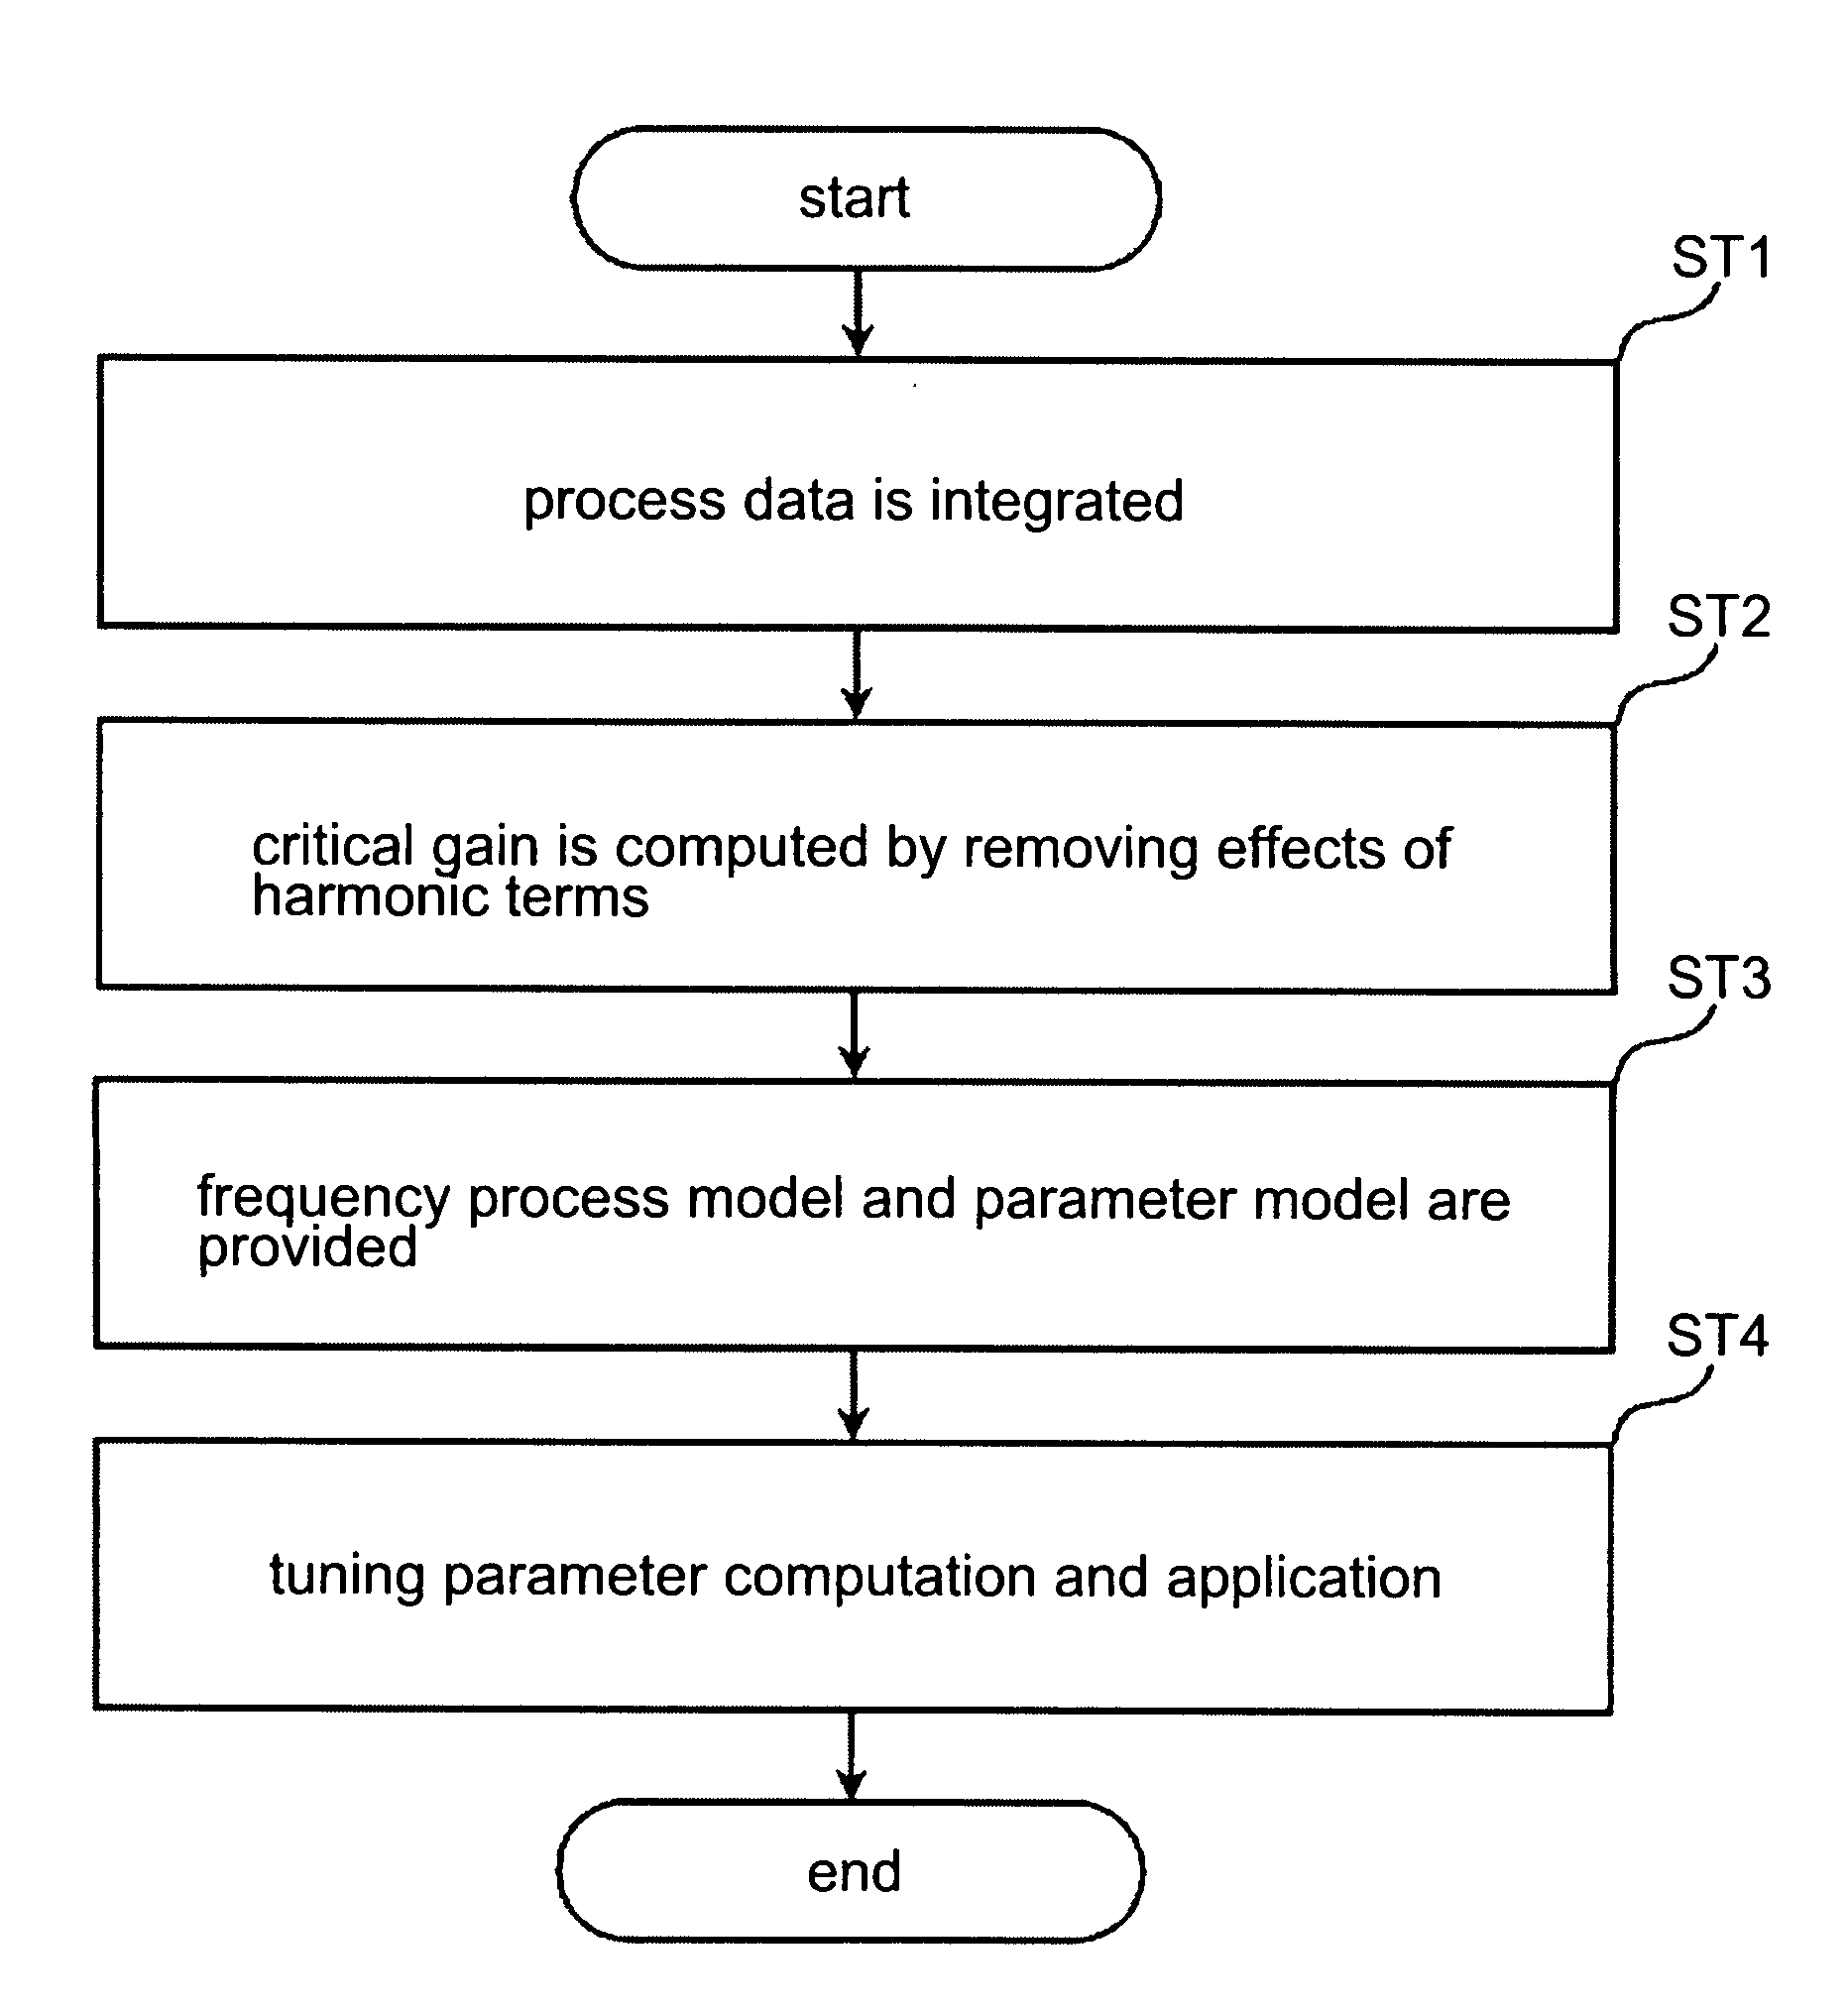 Autotuning method using integral of relay feedback response for extracting process information